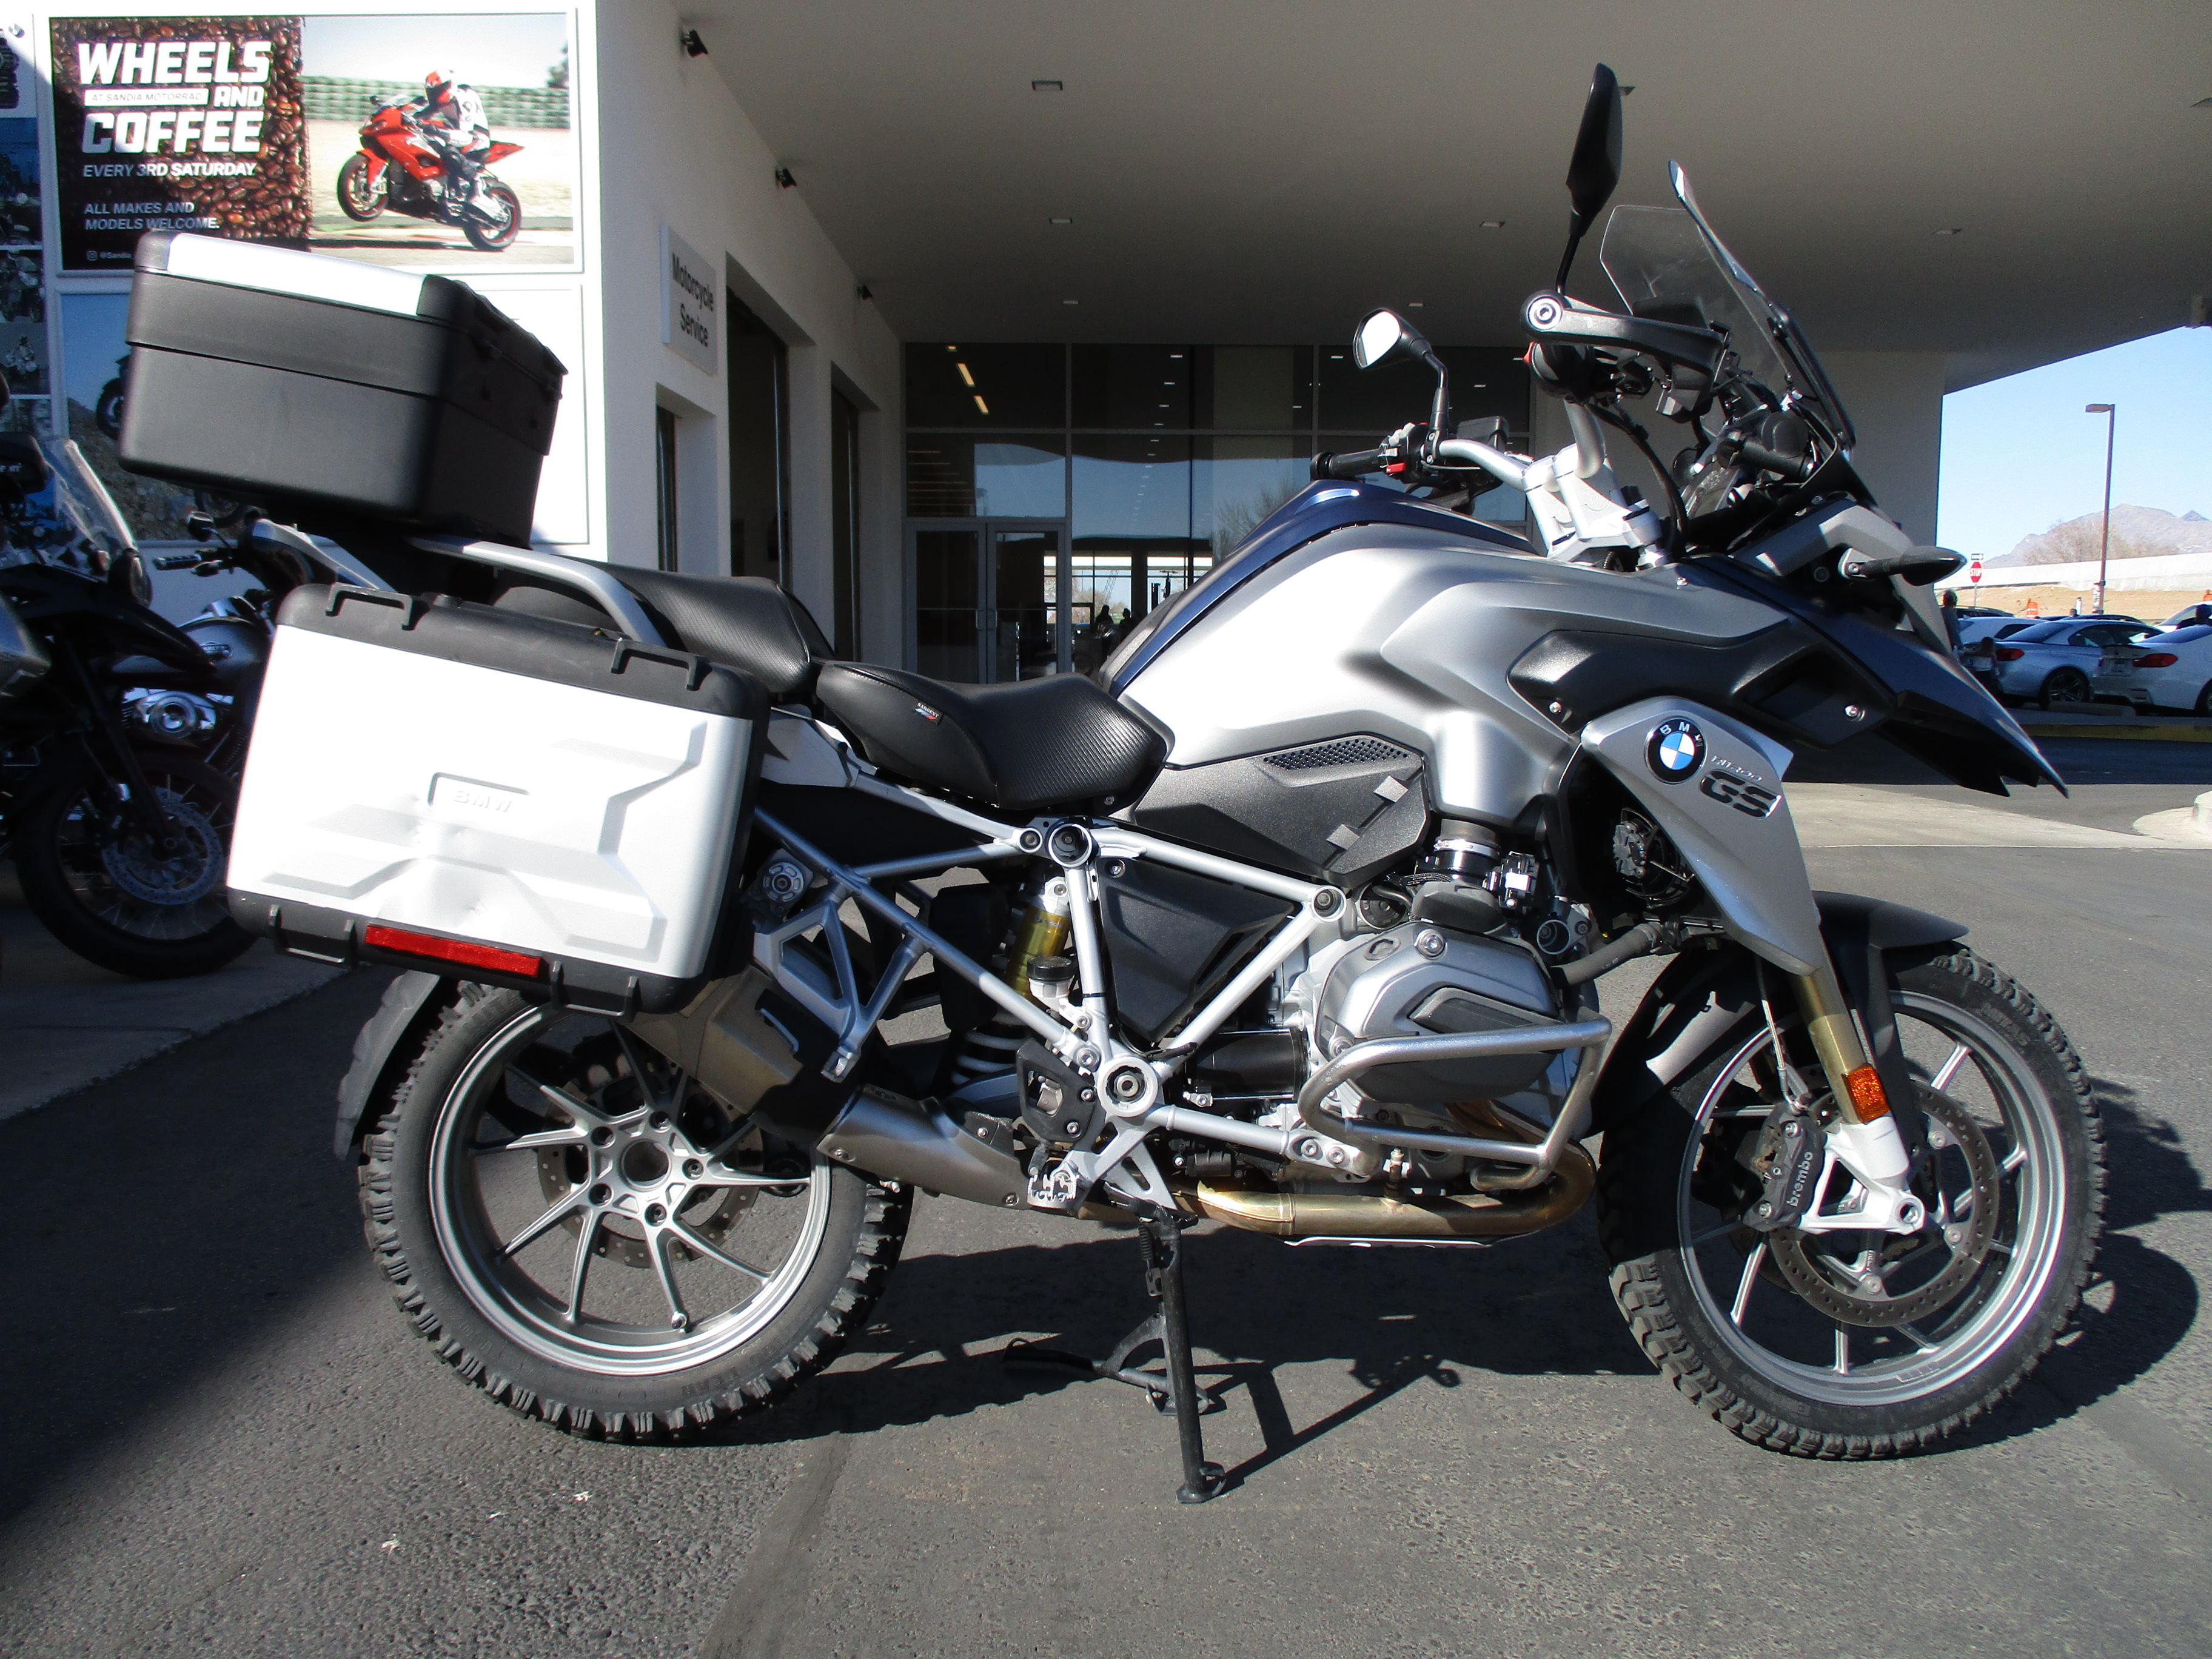 Pre-Owned Motorcycle Inventory - R1200GS - Sandia BMW Motorcycles